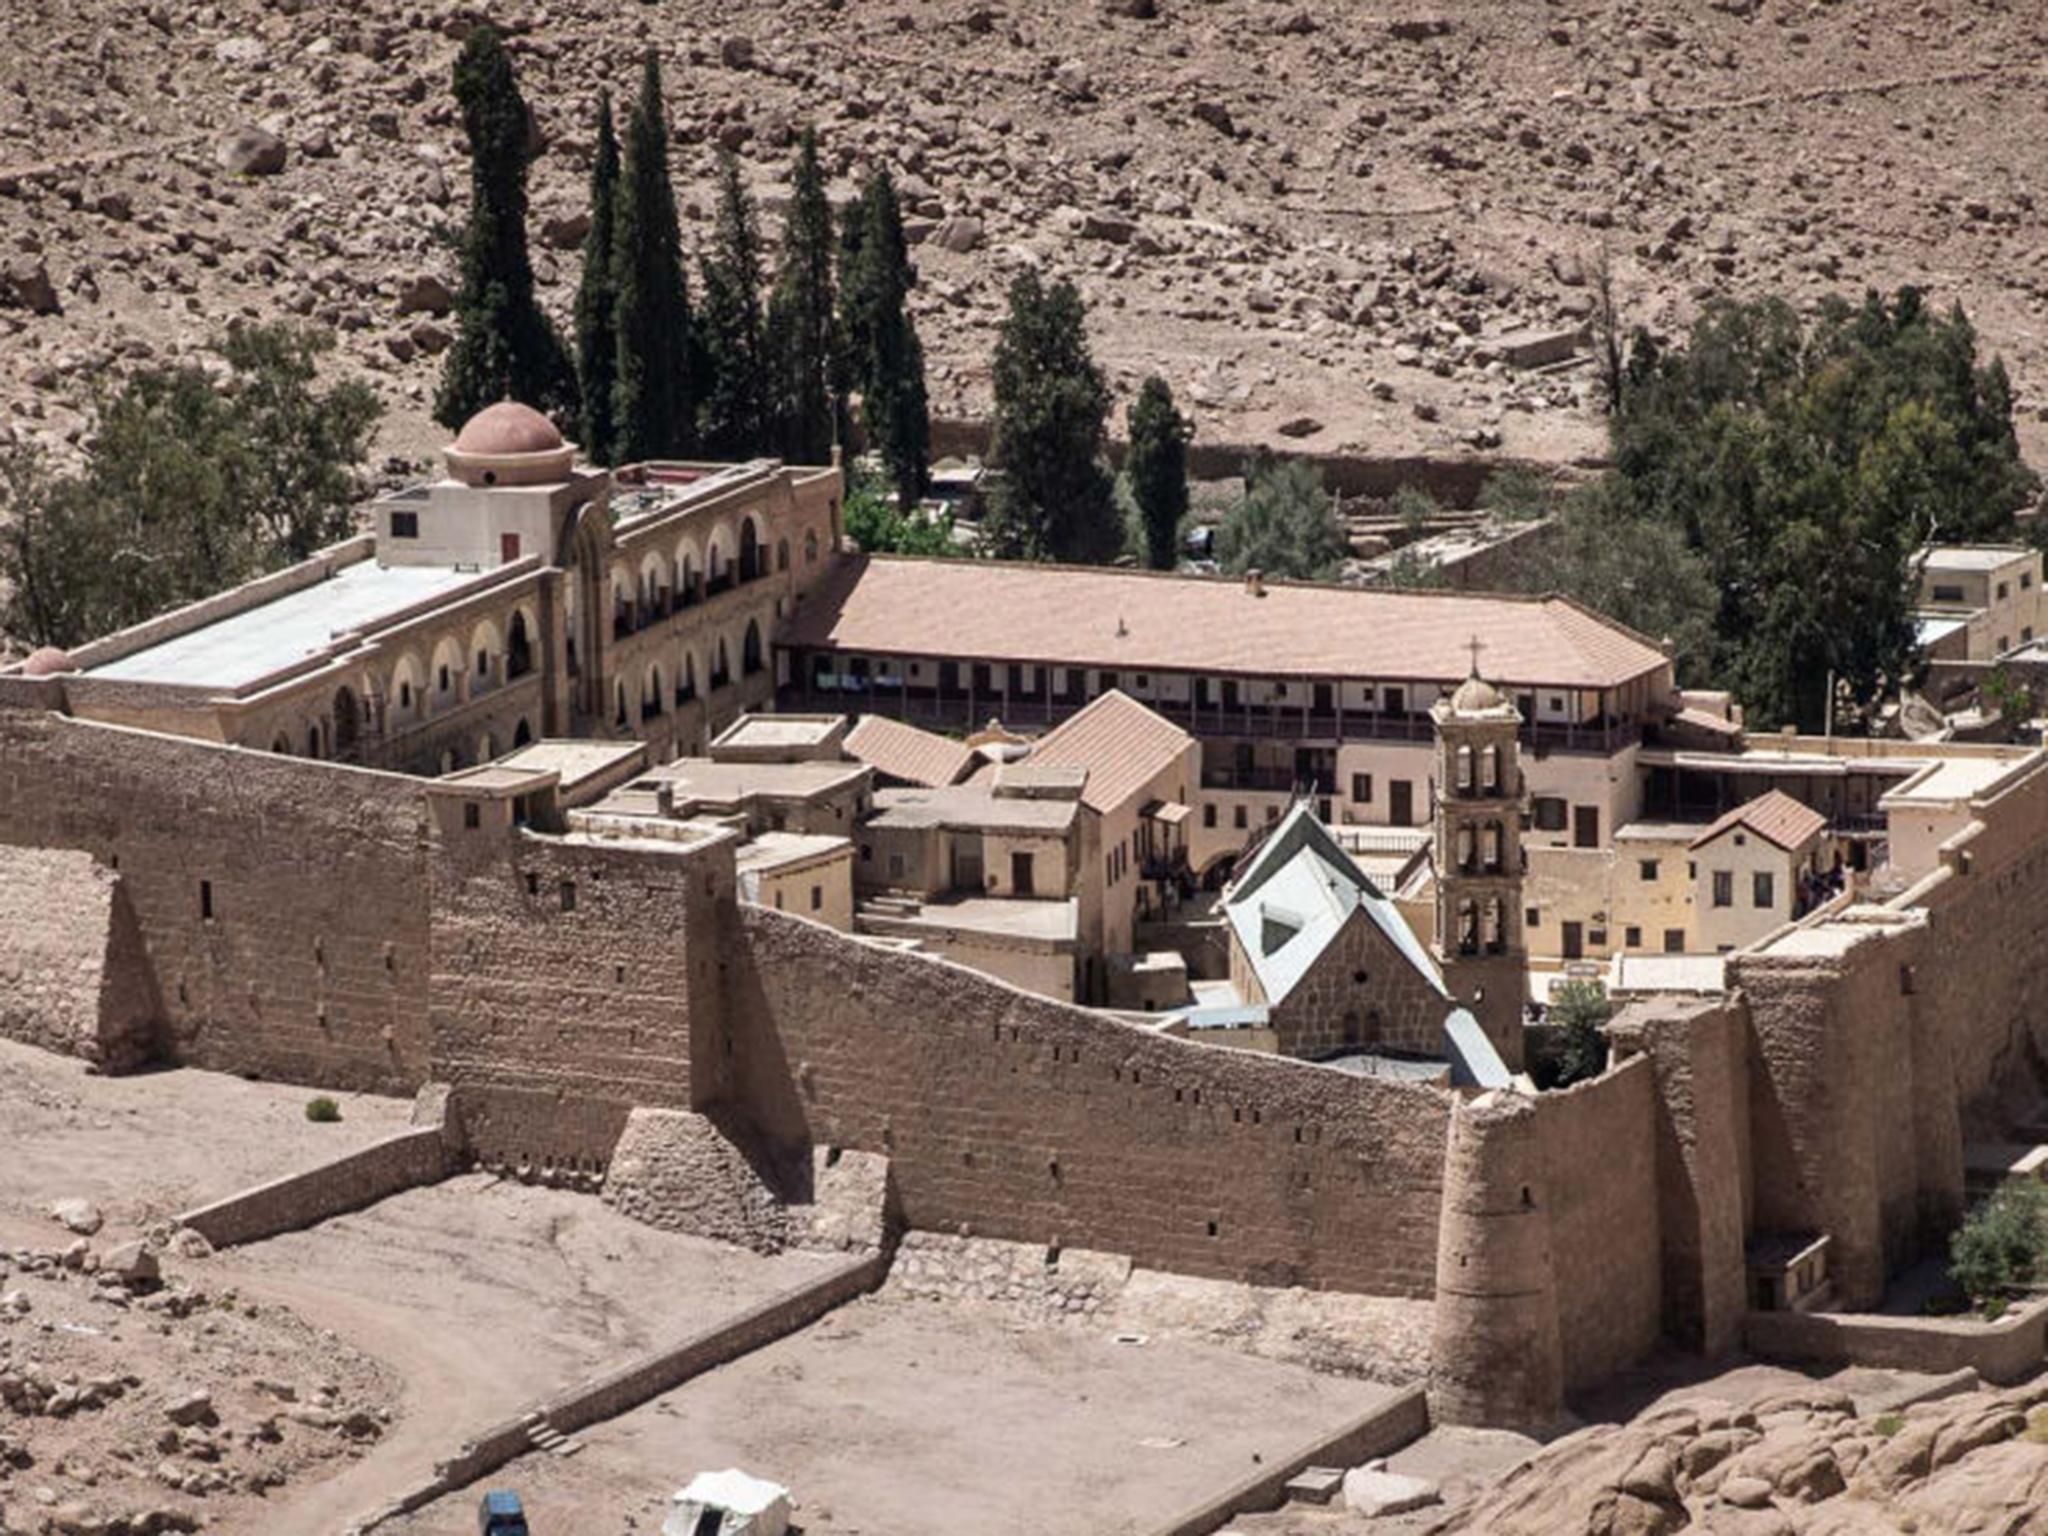 Parchments found at Saint Catherine’s monastery on the Sinai peninsula included the first-known copy of the gospels in Arabic 